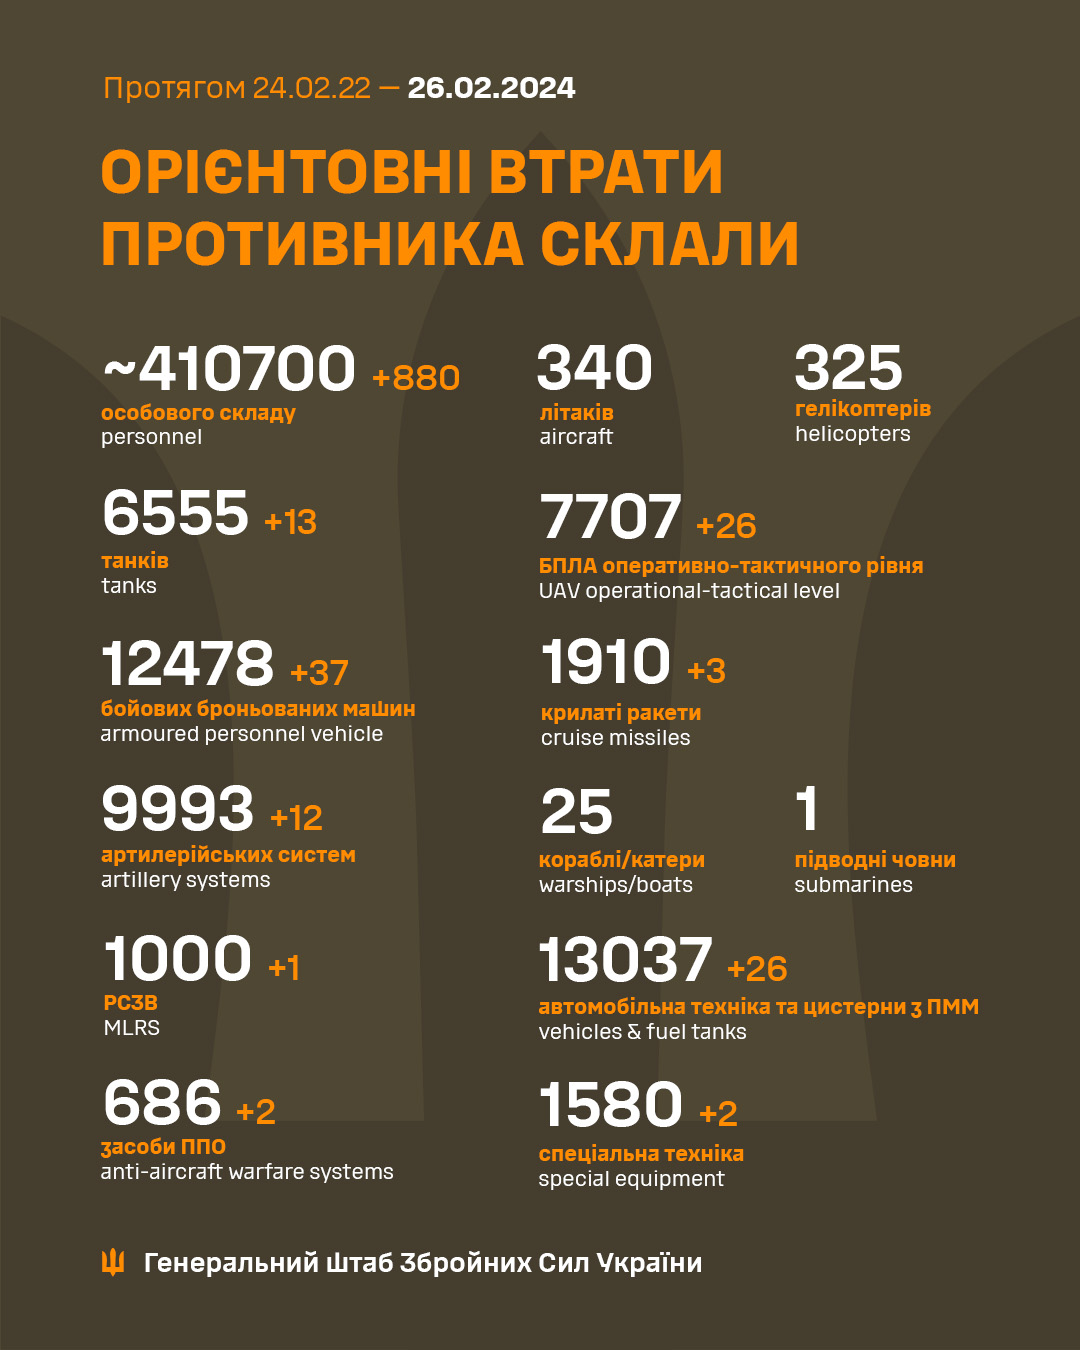 Ukrainian Military Death Toll Announced for the First Time: 31,000 Defenders Lost in Last Two Years of War